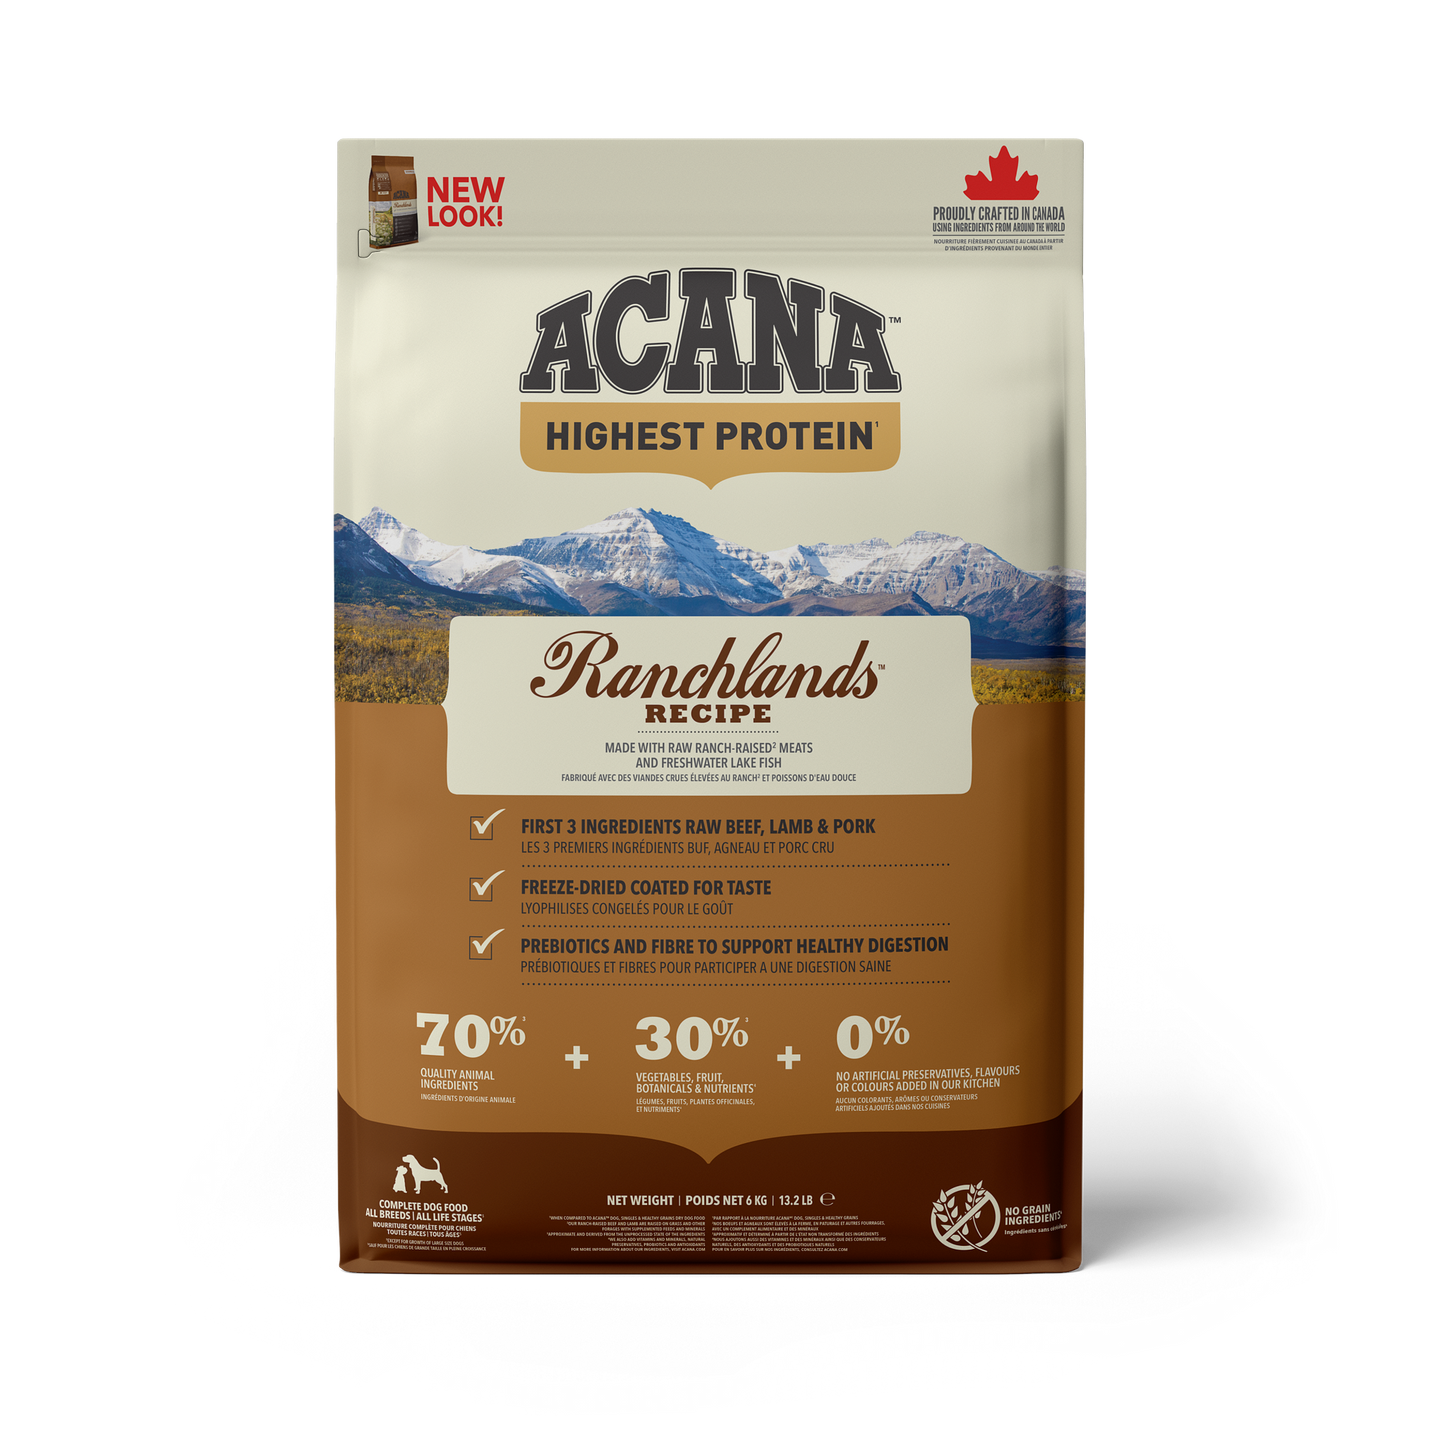 Acana Highest Protein Ranchlands Dry Dog Food Recipe  Dog Food  | PetMax Canada